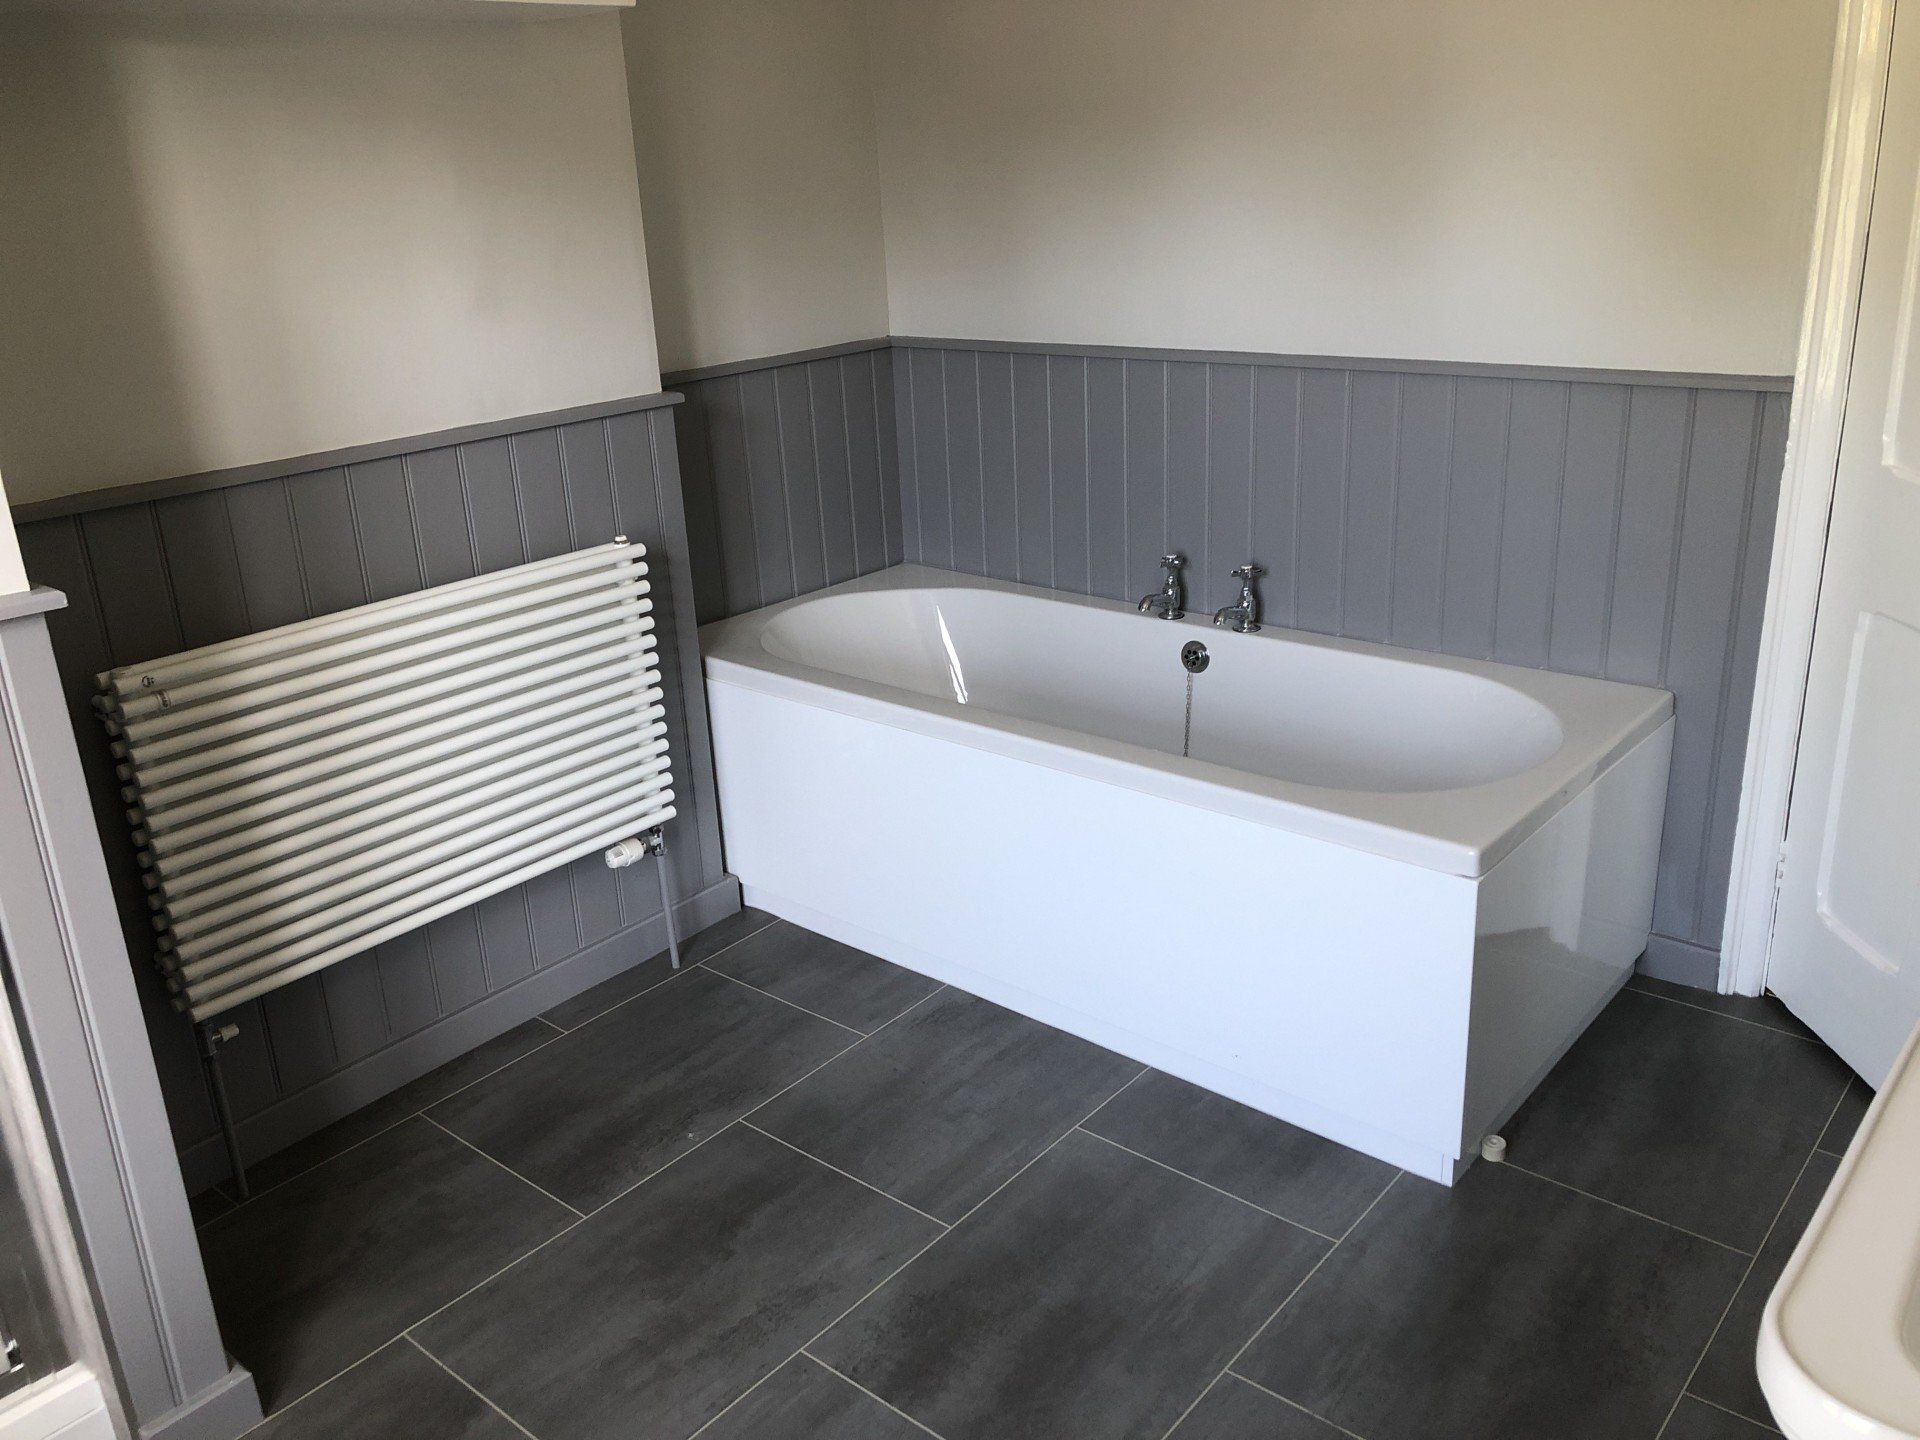 Below is a multiple bathroom installation for a property at Rugby School.   The en-suite used to be a storage area which was dead space- but now we have created a functional en-suite.  The cloakroom and main bathroom used to be outdated and now they have both been transformed into modern areas.